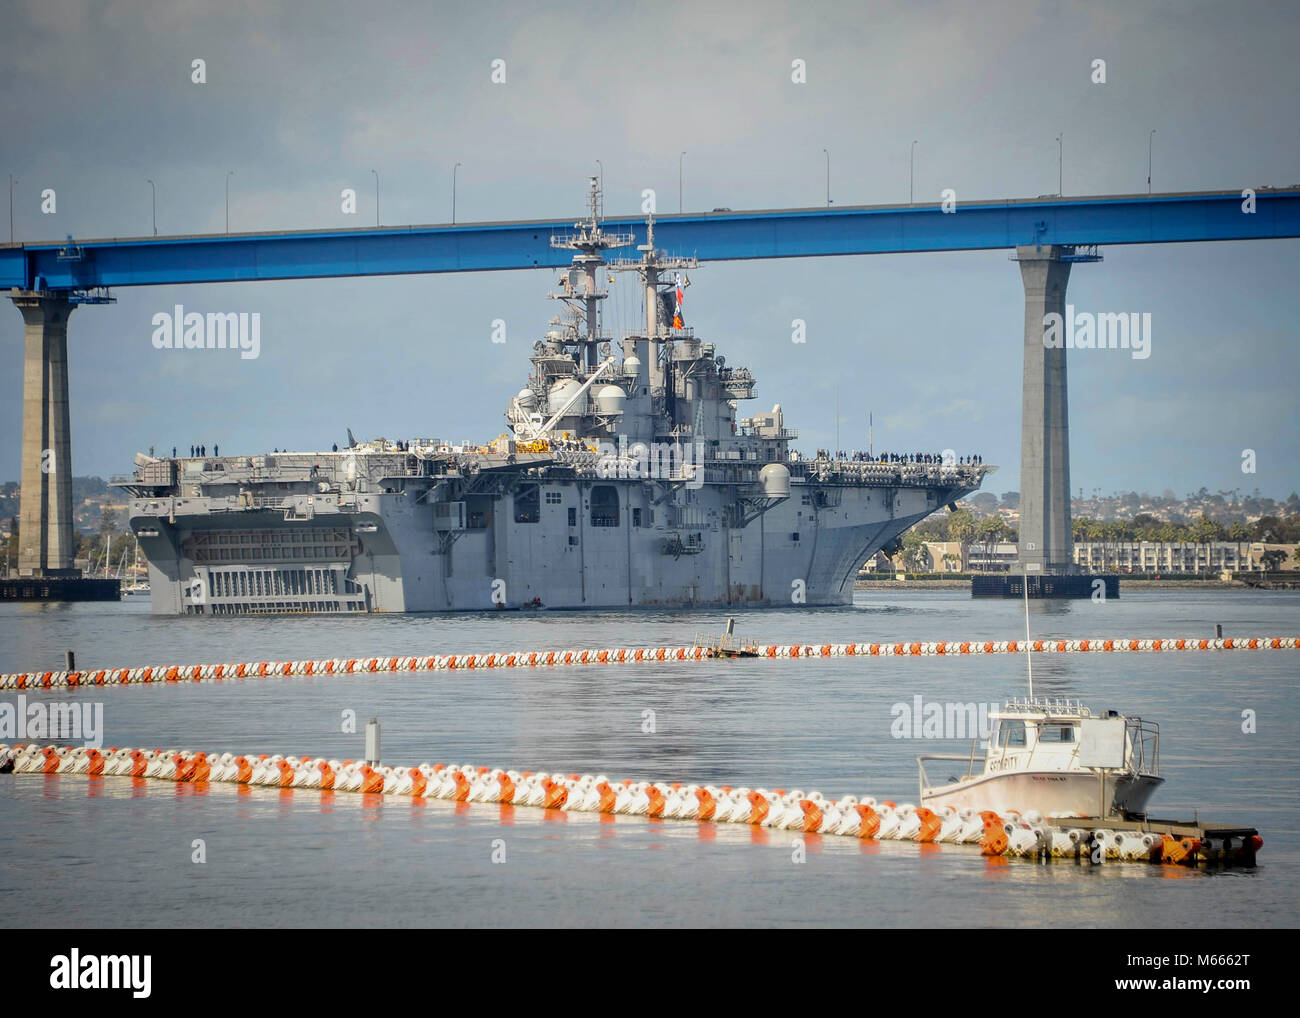 SAN DIEGO (Feb. 27, 2018) Amphibious assault ship USS Boxer (LHD 4) approaches the Coronado Bridge while transiting the San Diego Bay. Boxer is currently underway off the coast of Southern California conducting contractor sea trials. (U.S. Navy Photo by Mass Communication Specialist 2nd Class Jesse Monford/RELEASED) Stock Photo